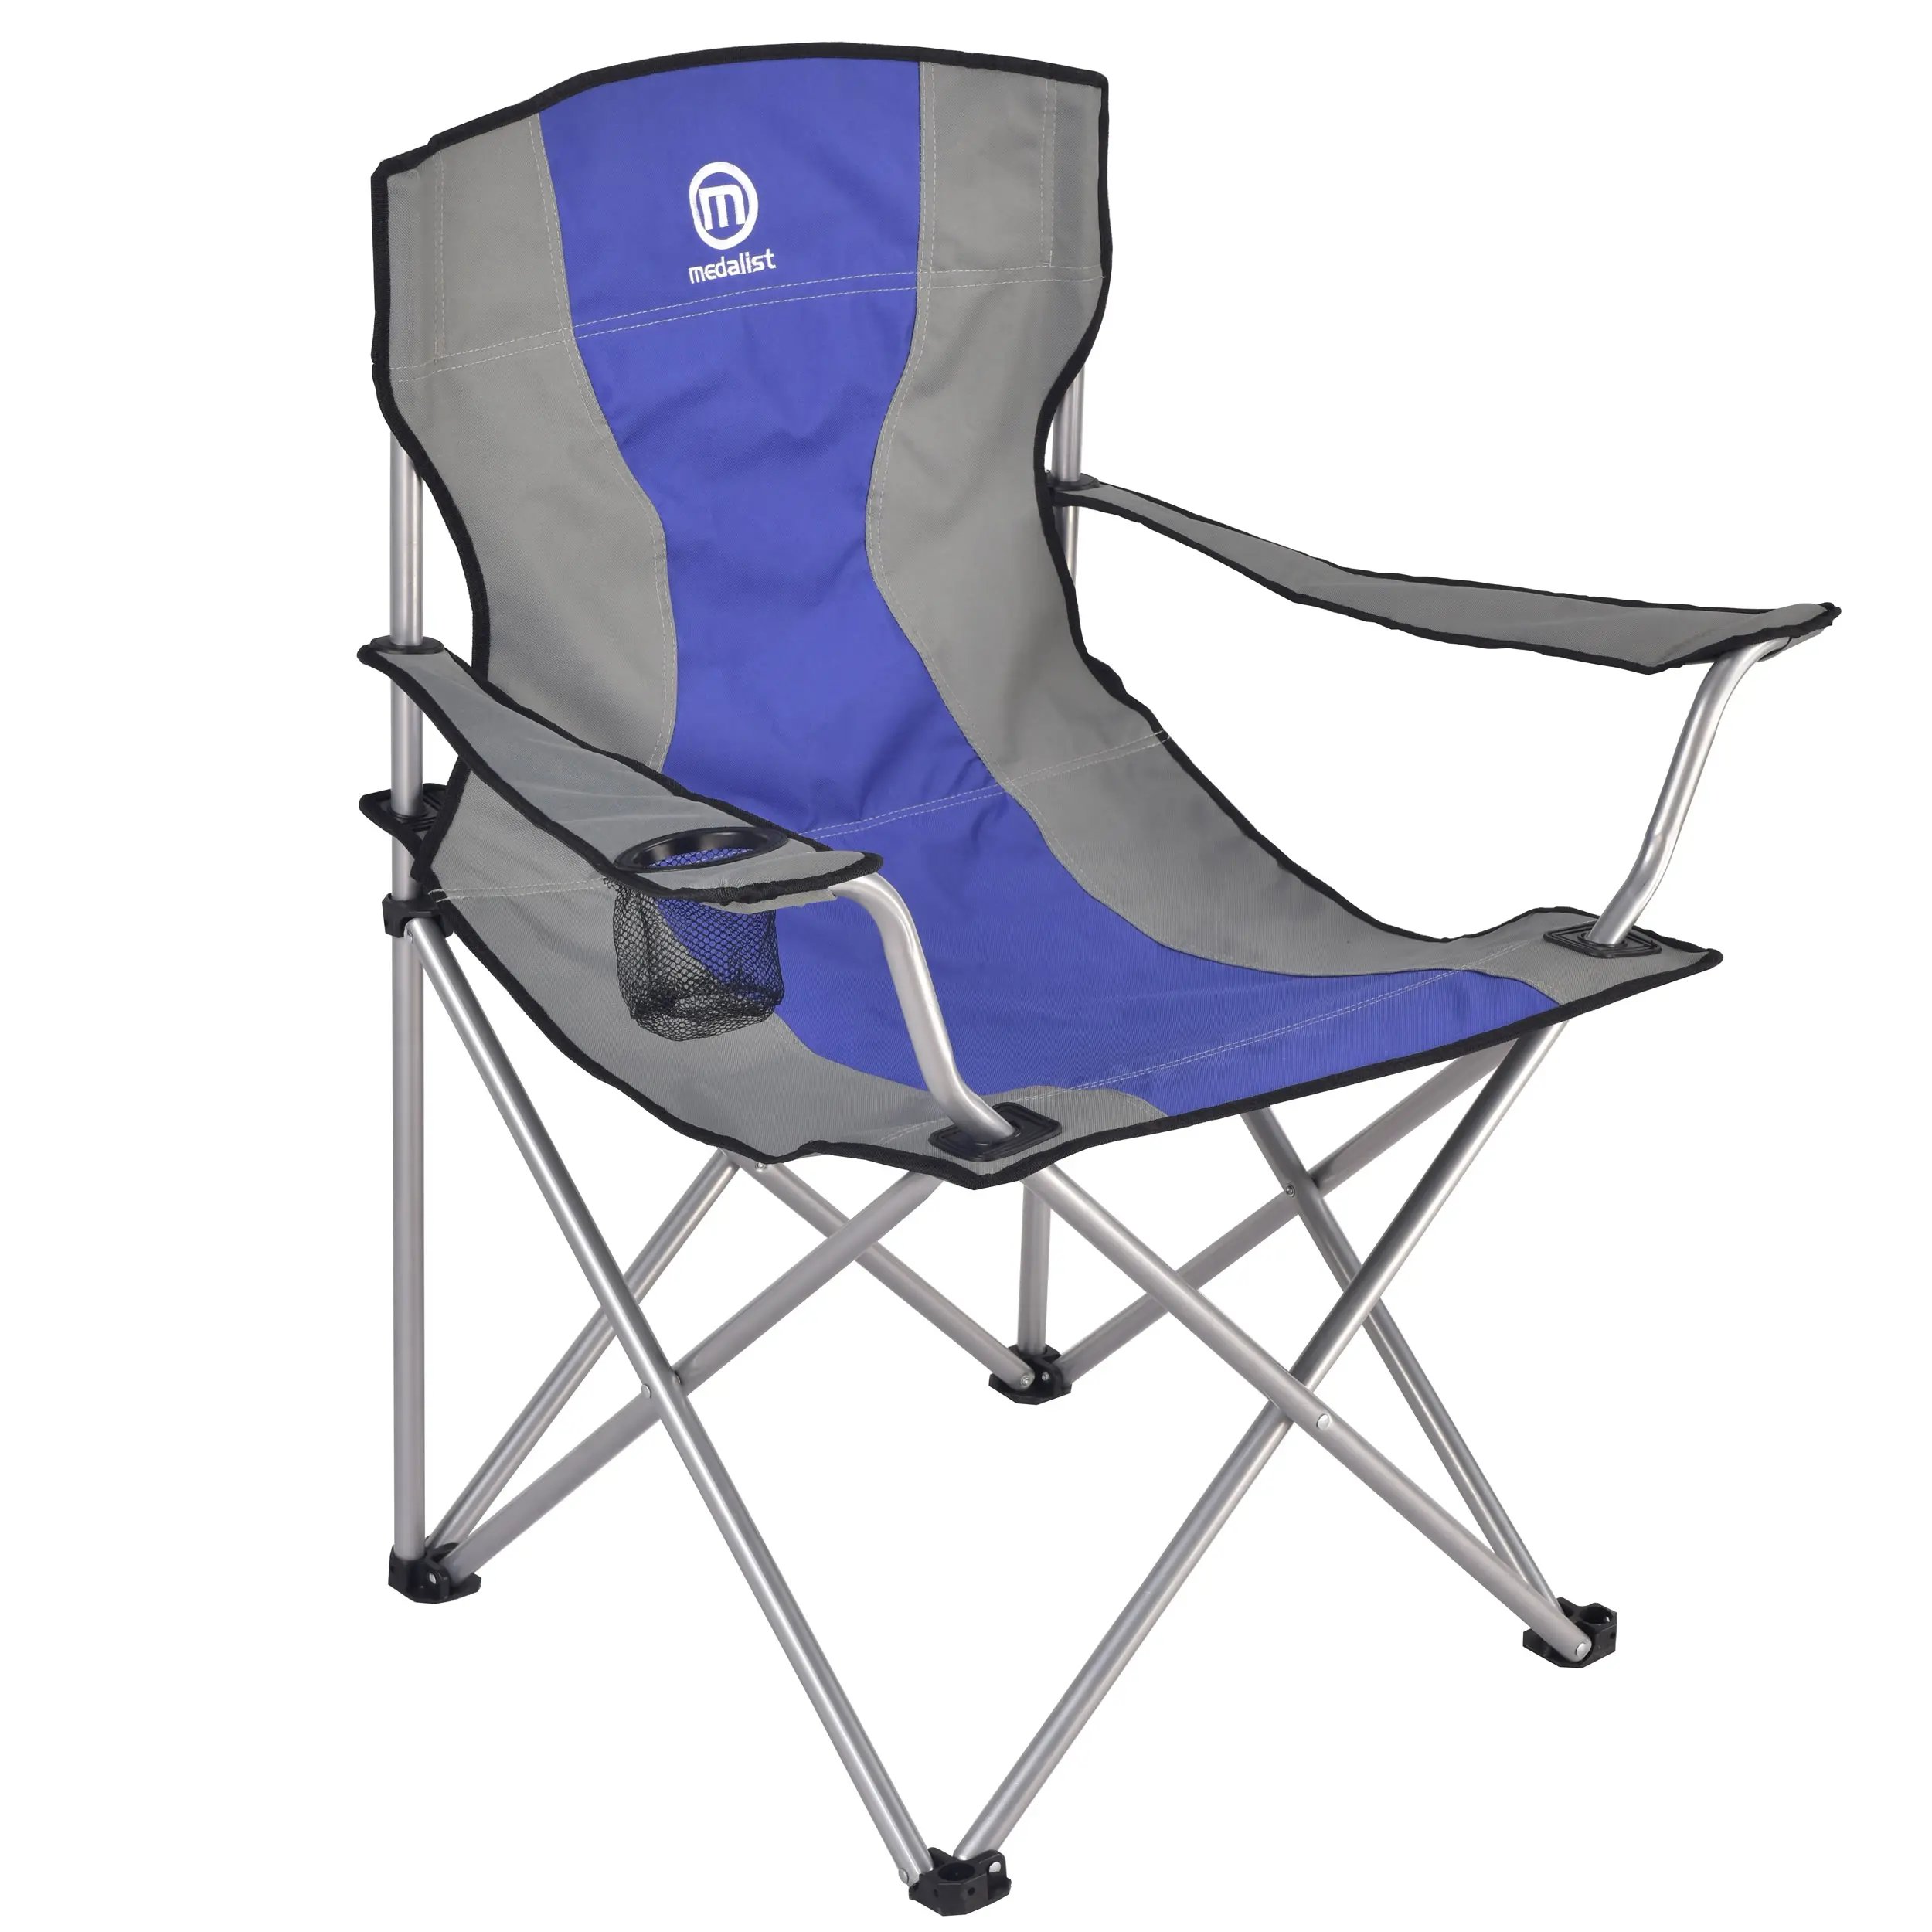 QIBU Multifunctional Chair Camping Fishing Hiking Beach Picnic Chair ultralight Easy Packable with Carrying Bag Compact Folding